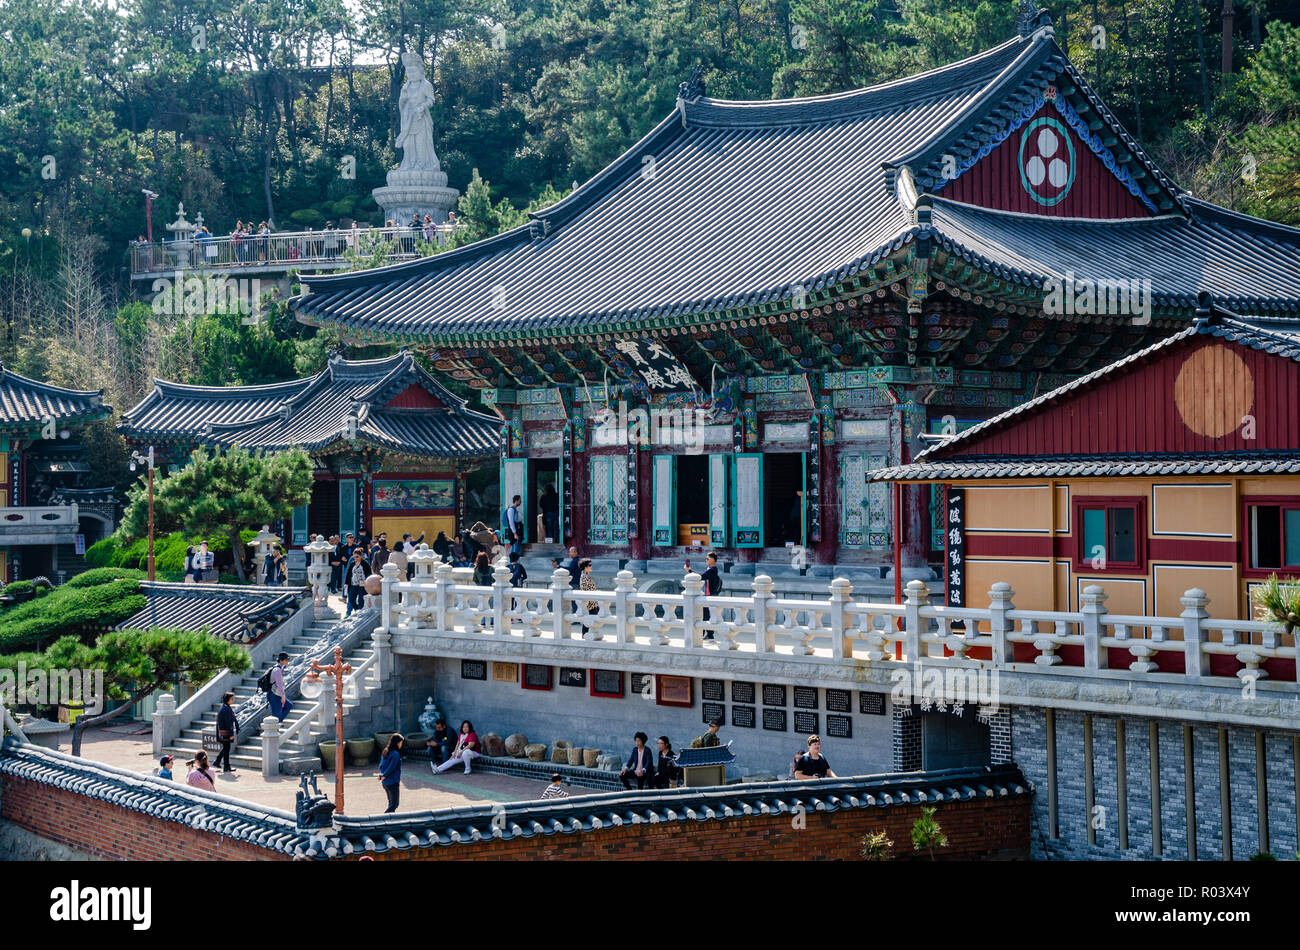 Haedong Yonggungsa Temple is a Buddhist Temple at Busan, South Korea which attracts many visitors. Stock Photo